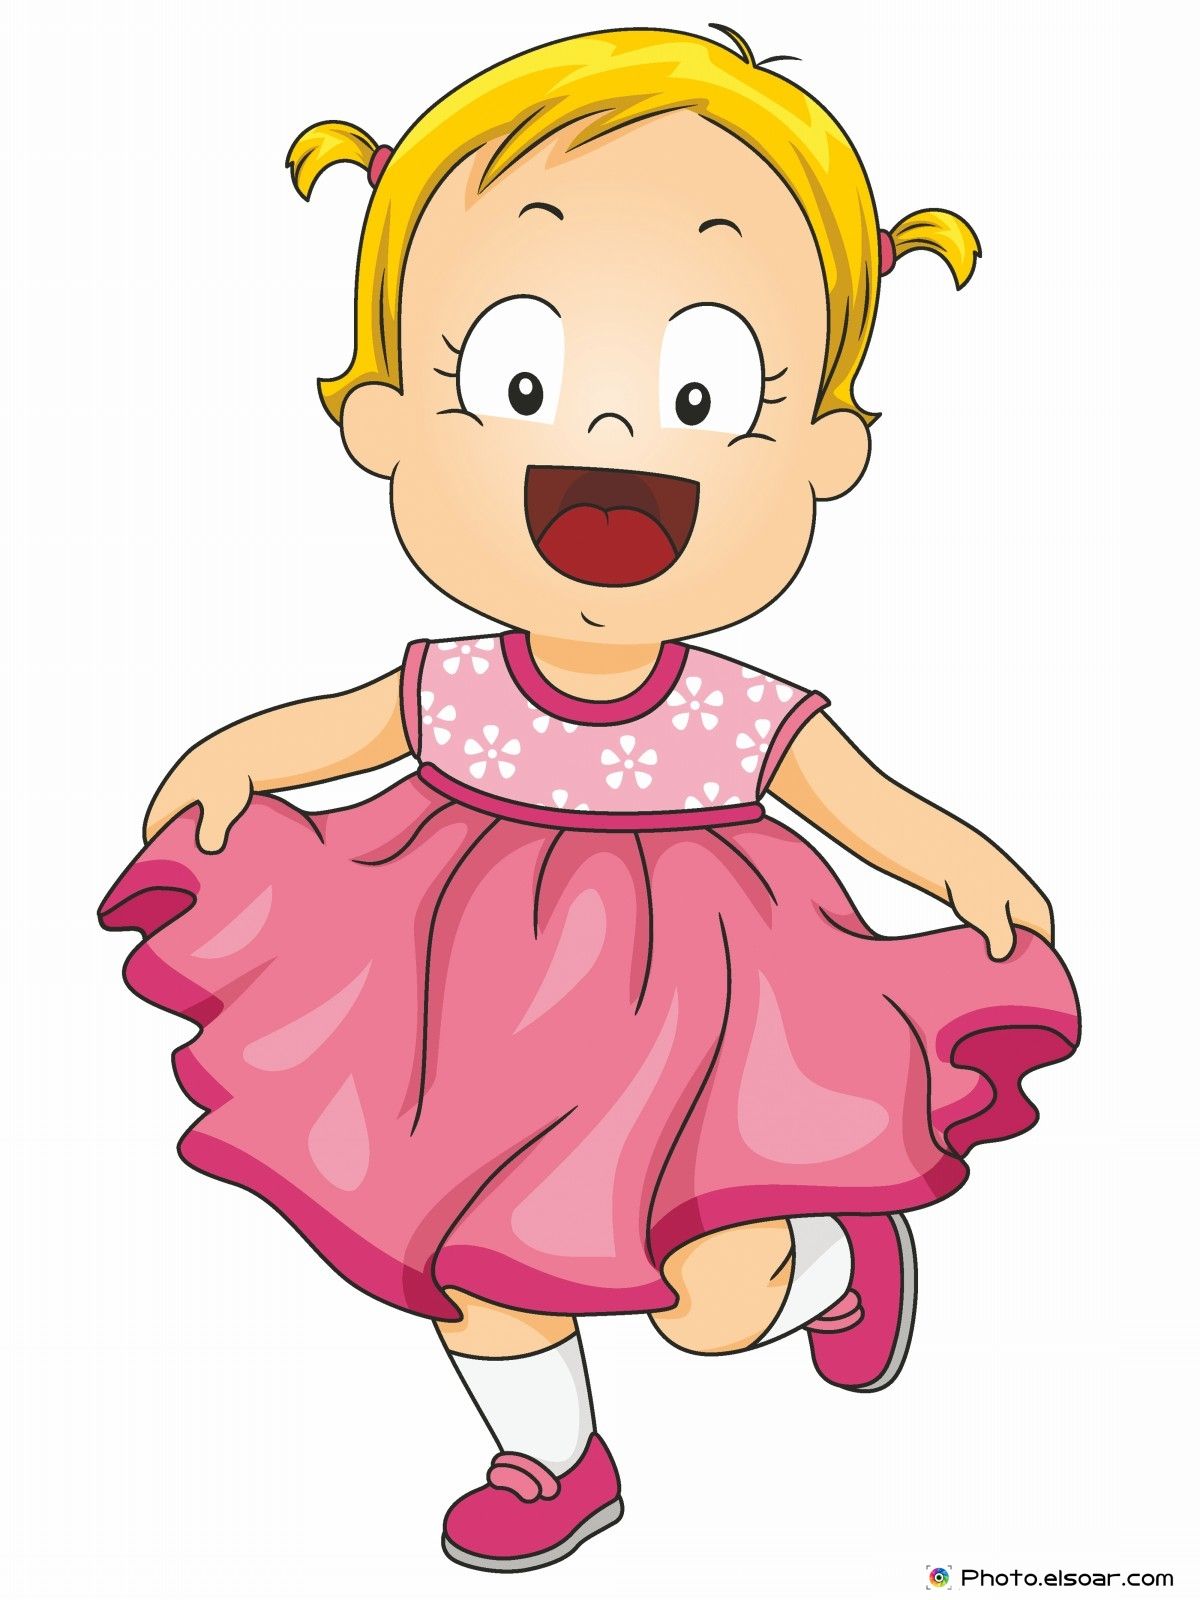 Smiling Little Girl Wearing a Pink Frilly Dress